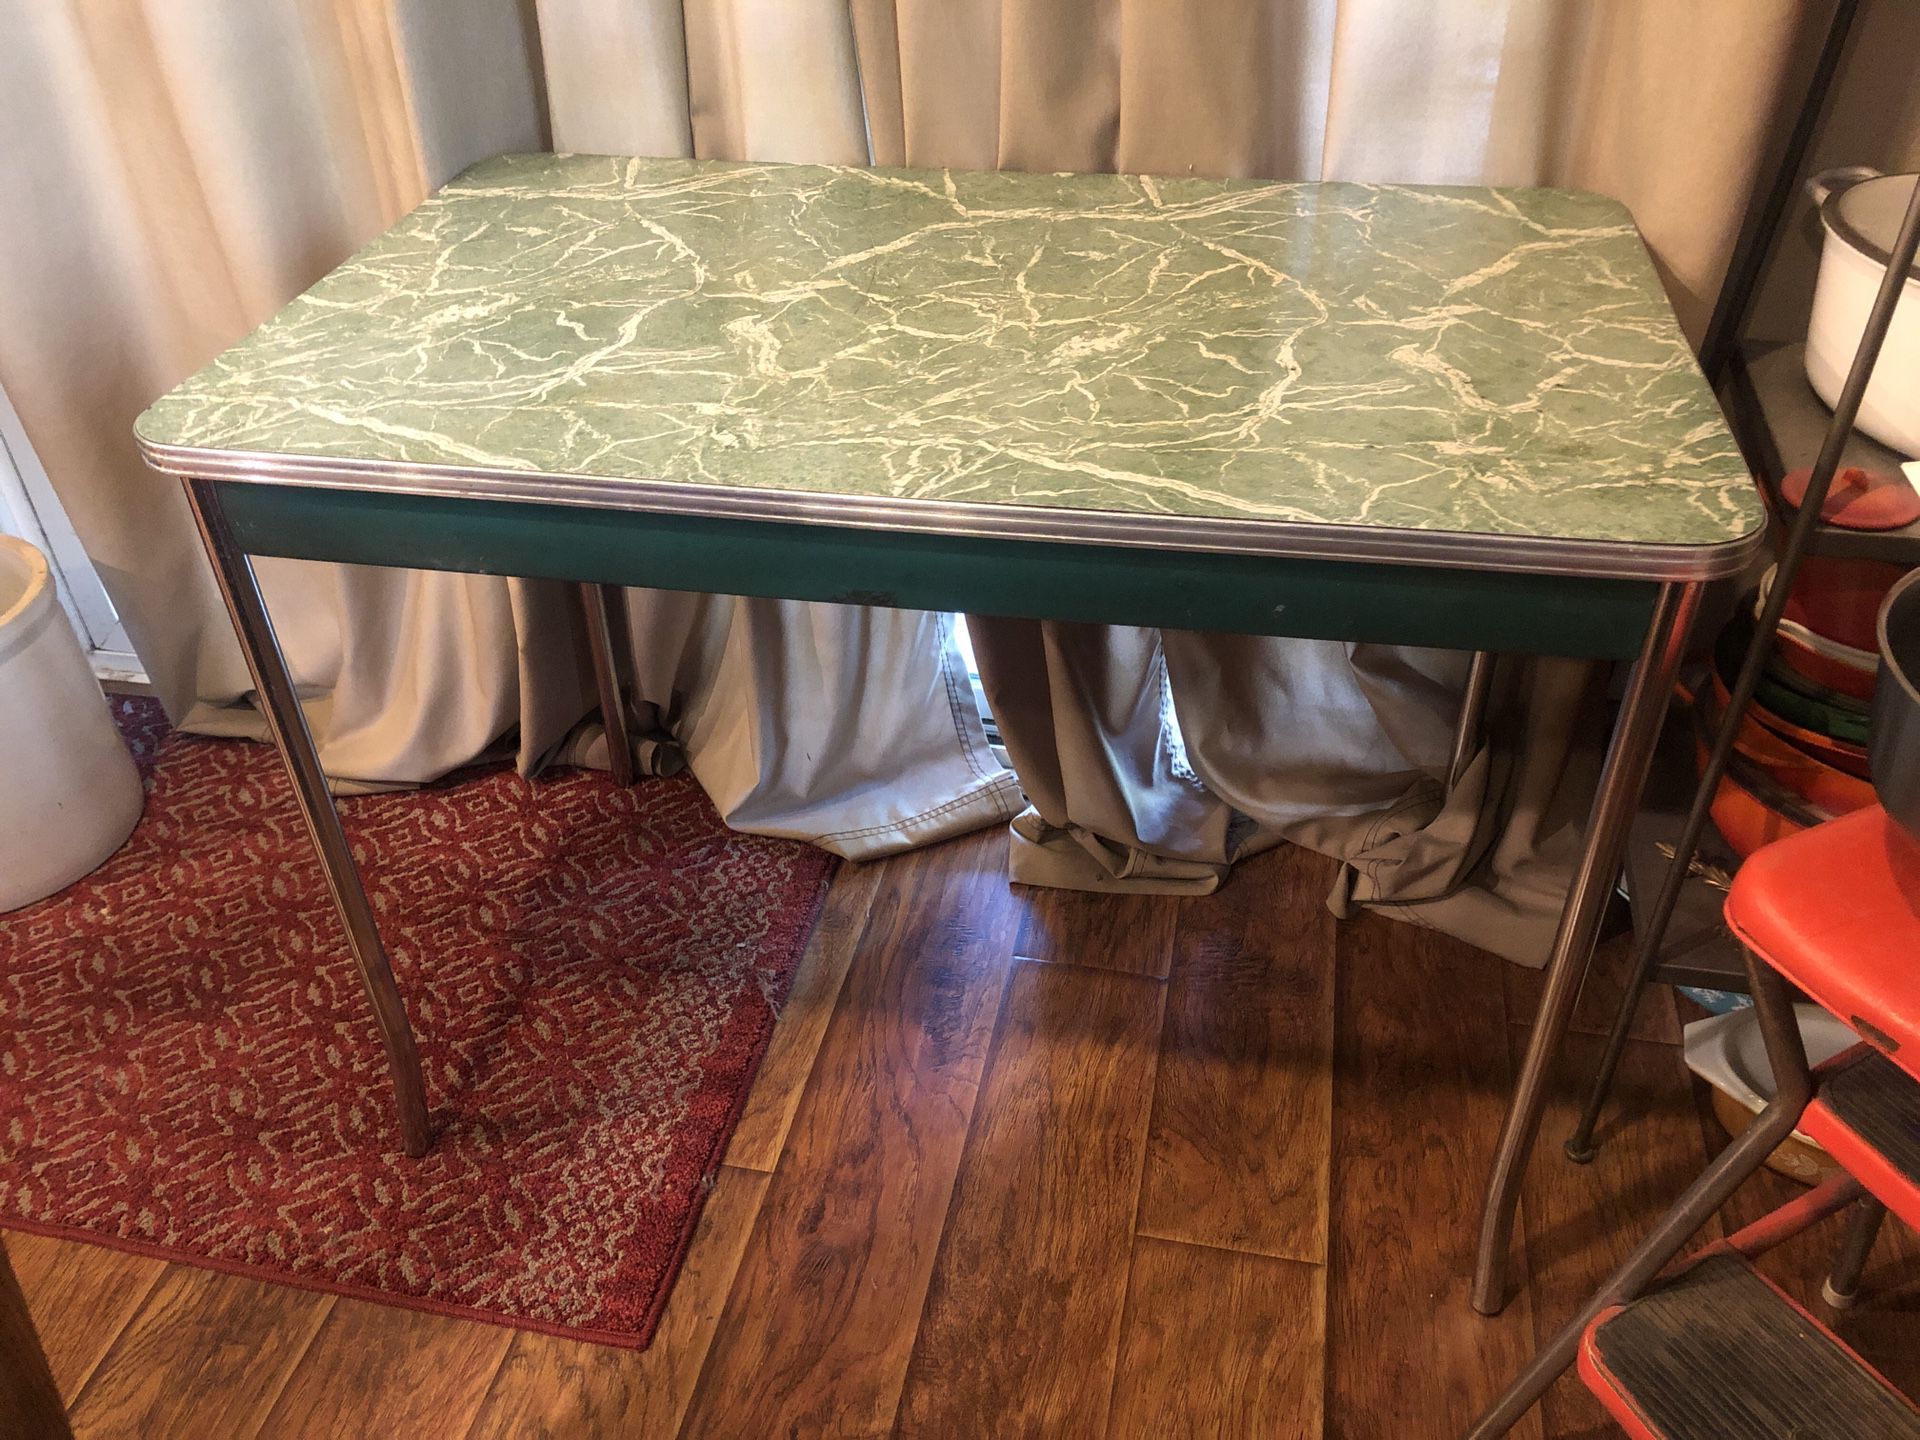 Vintage 1950's Green Formica Kitchen Dinette Table Retro Mid Century